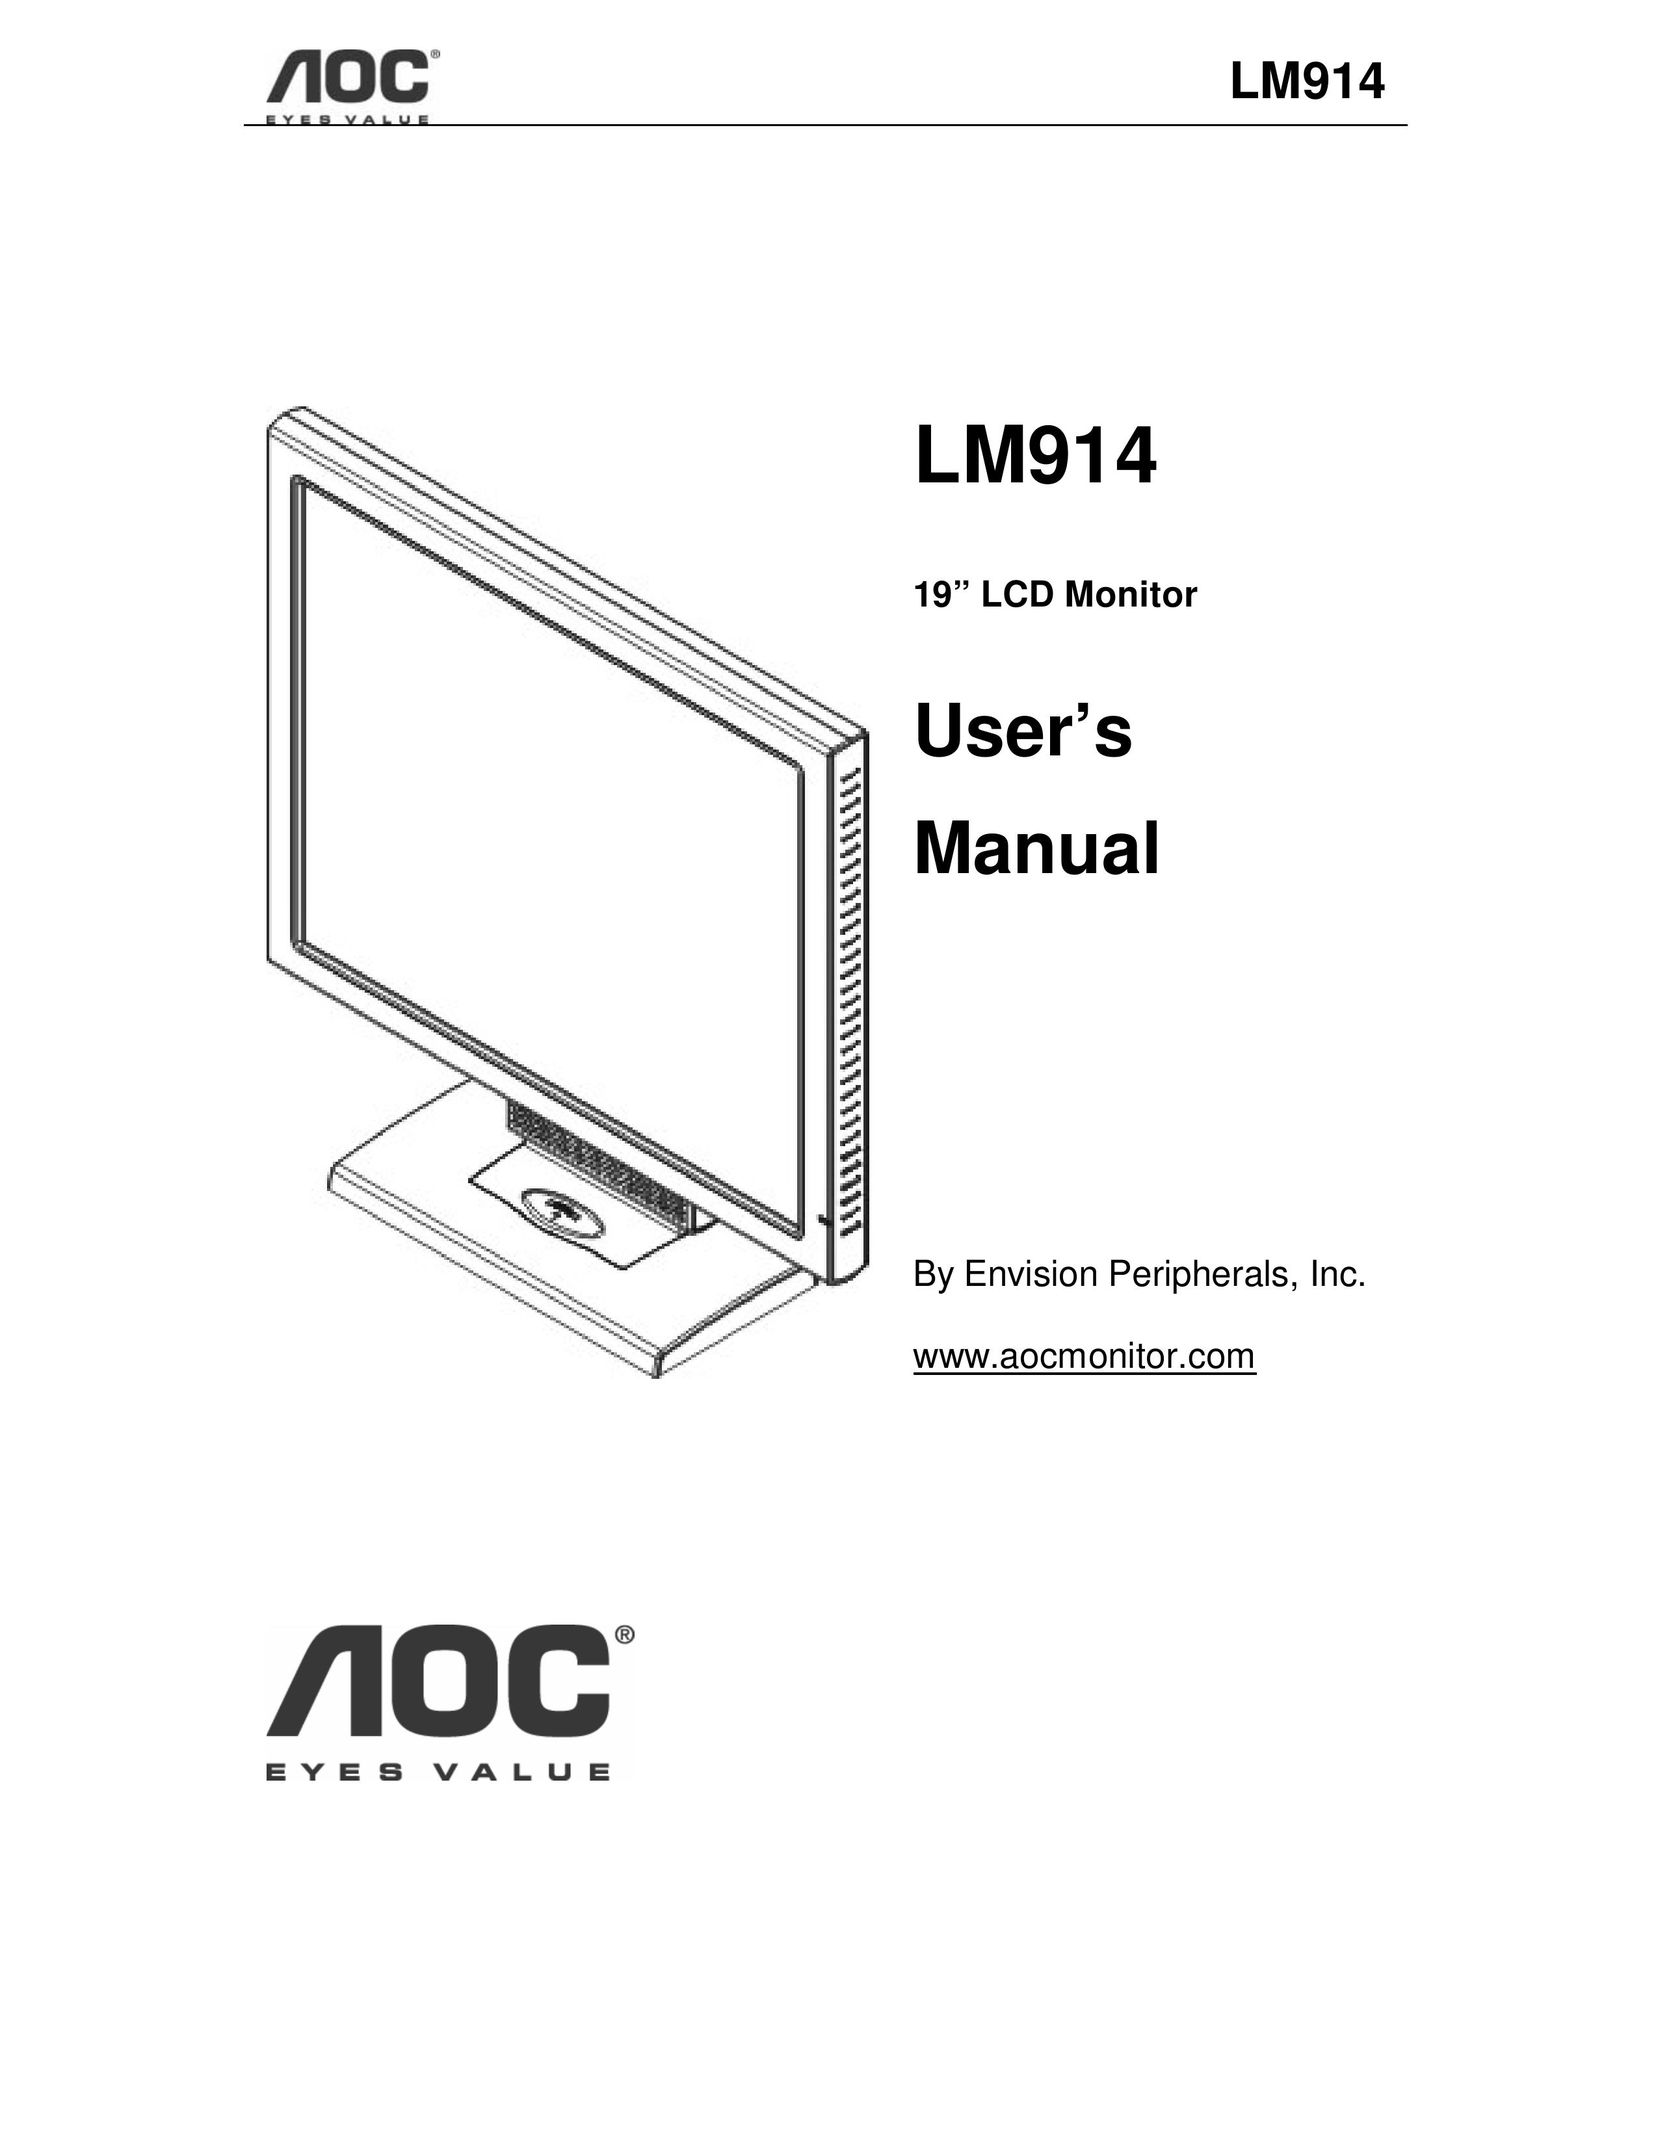 Envision Peripherals LM914 Computer Monitor User Manual